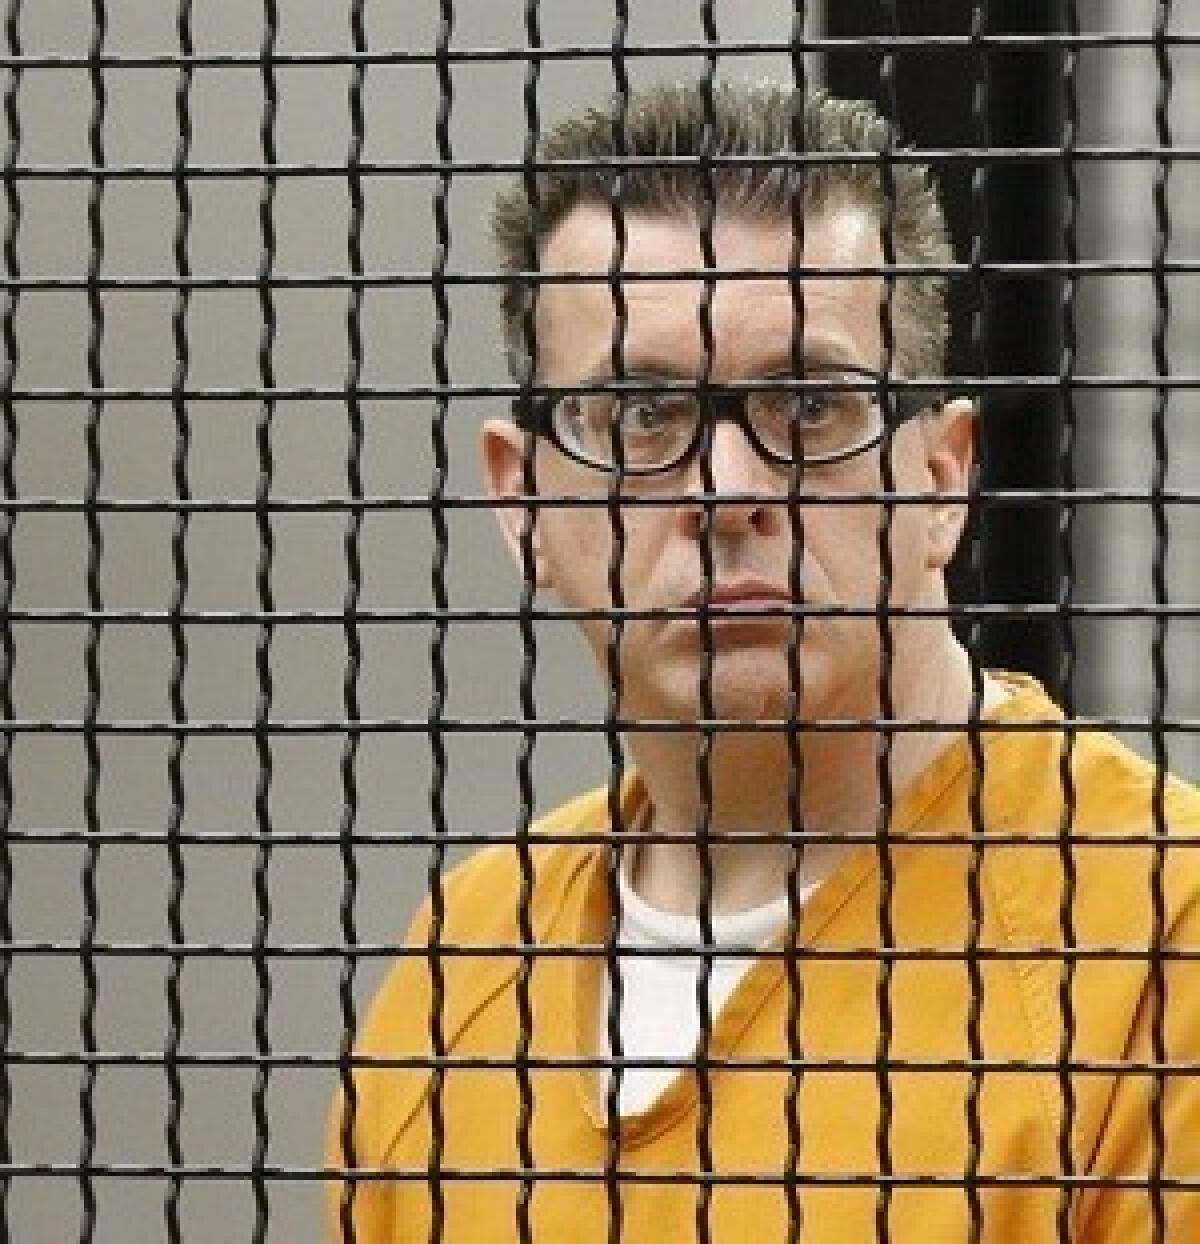 Former UC Irvine professor Rainer Klaus Reinscheid looks out from the prisoner's cage during his arraignment.